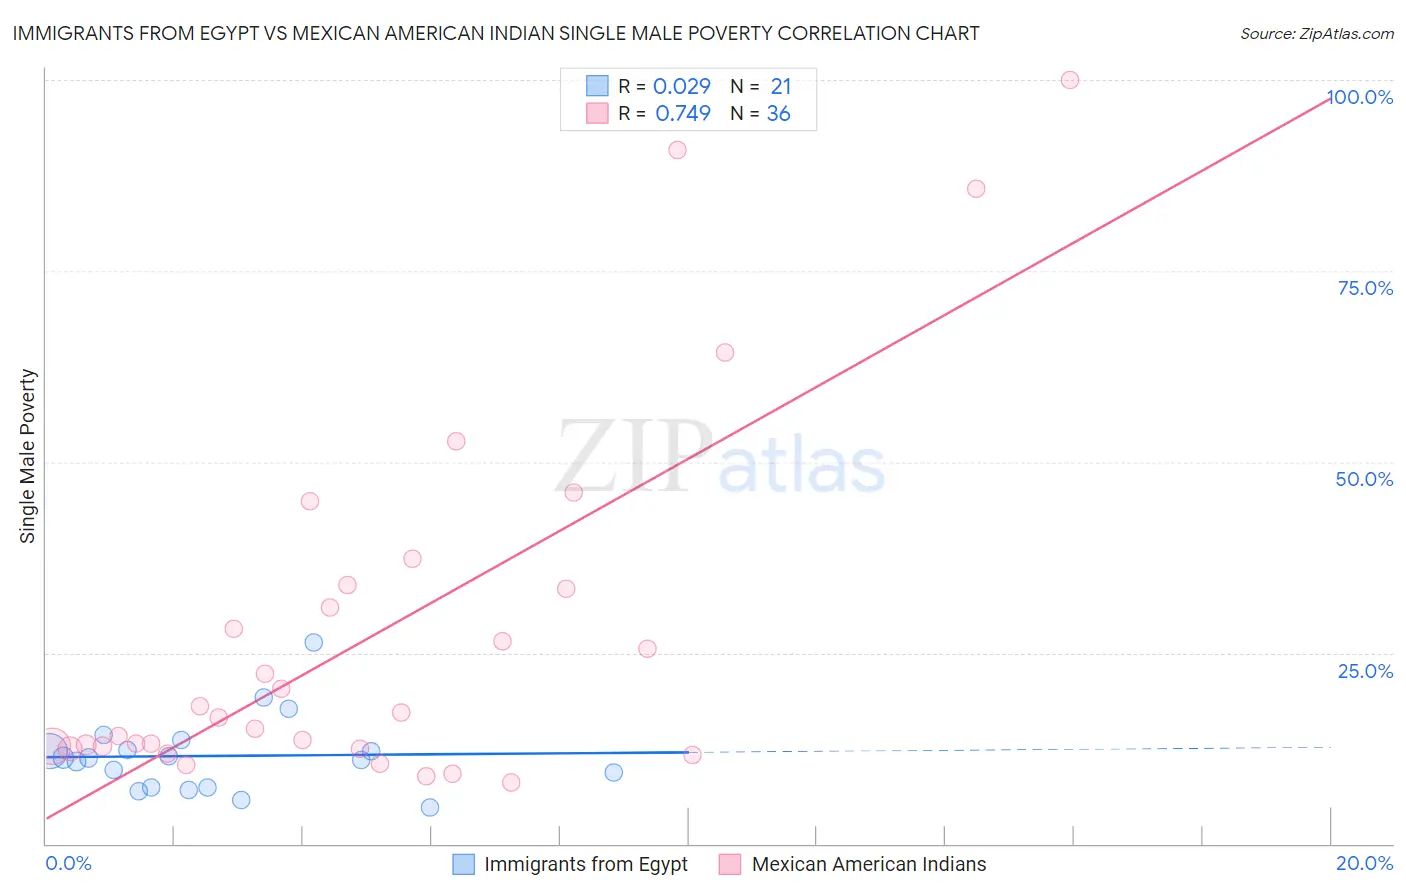 Immigrants from Egypt vs Mexican American Indian Single Male Poverty